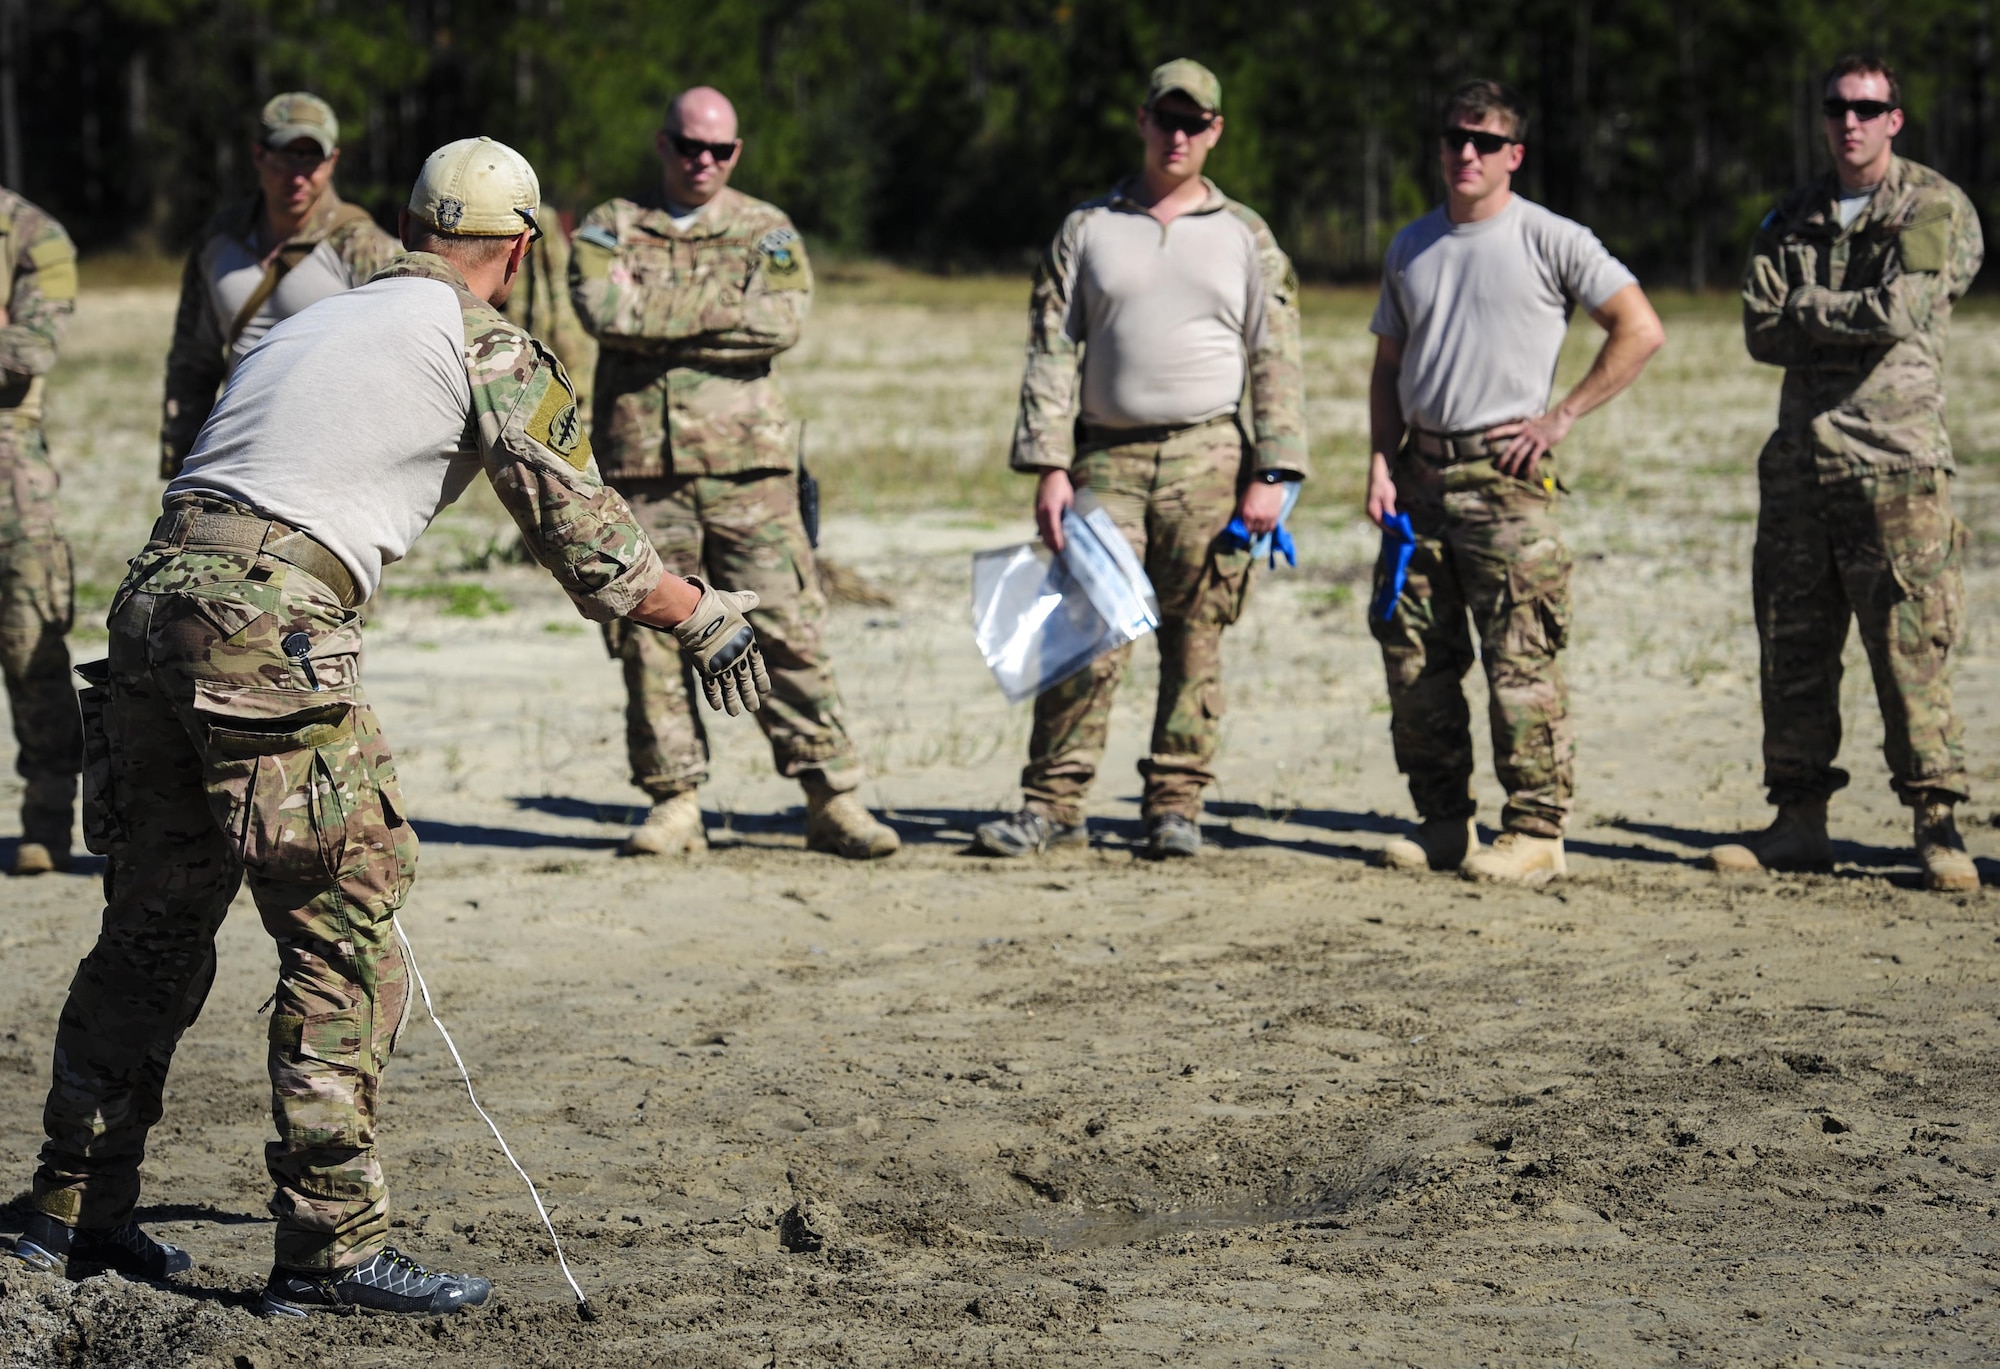 Master Sgt. Ronnie Brickey, an explosive ordnance disposal operations section chief with the 1st Special Operations Civil Engineer Squadron, speaks to Airmen during post-blast analysis training at Hurlburt Field, Fla., Nov. 19, 2015. A post-blast analysis takes place when an improvised explosive device detonates and EOD Airmen arrive on scene to determine what happened. (U.S. Air Force photo/Senior Airman Meagan Schutter)